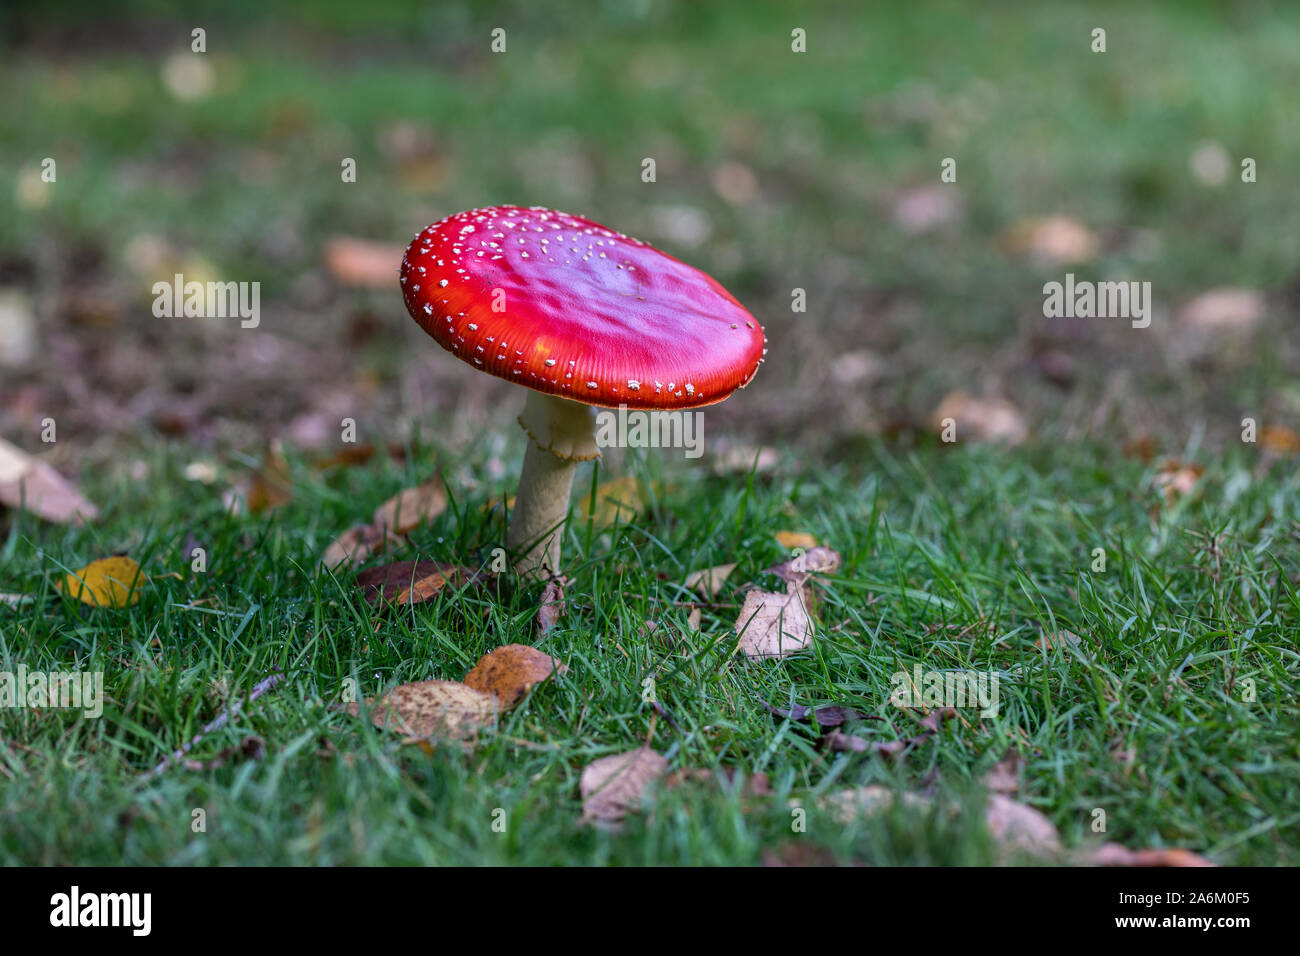 Close up of a single red Fly agaric mushroom - Amanita muscaria. A toxic toadstool growing in the grass at Westonbirt, England, UK Stock Photo